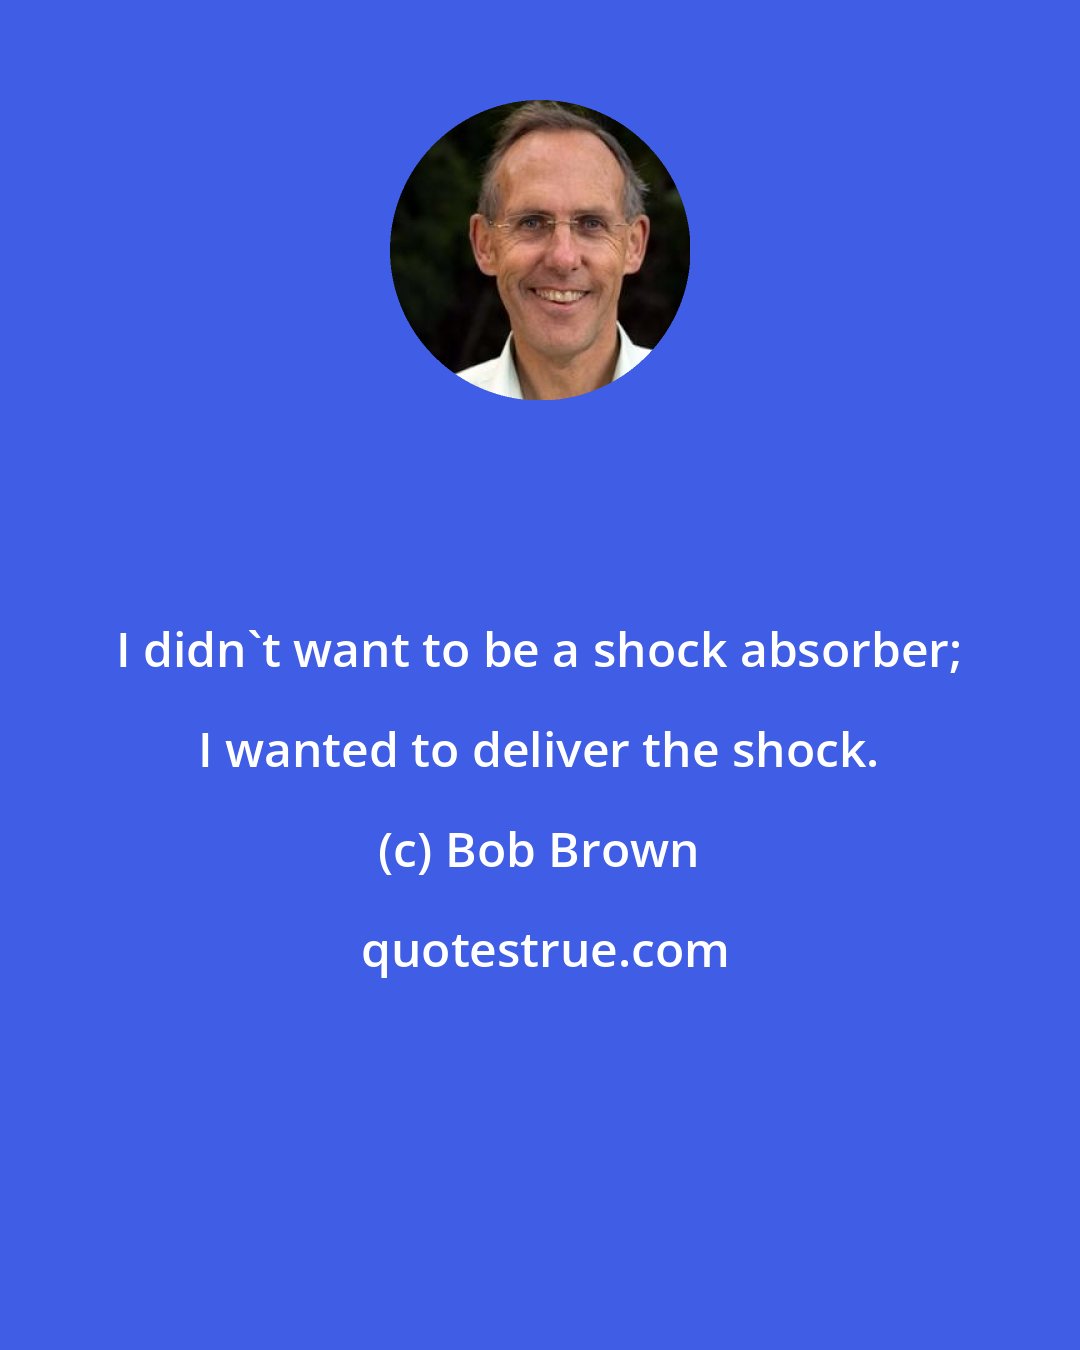 Bob Brown: I didn't want to be a shock absorber; I wanted to deliver the shock.